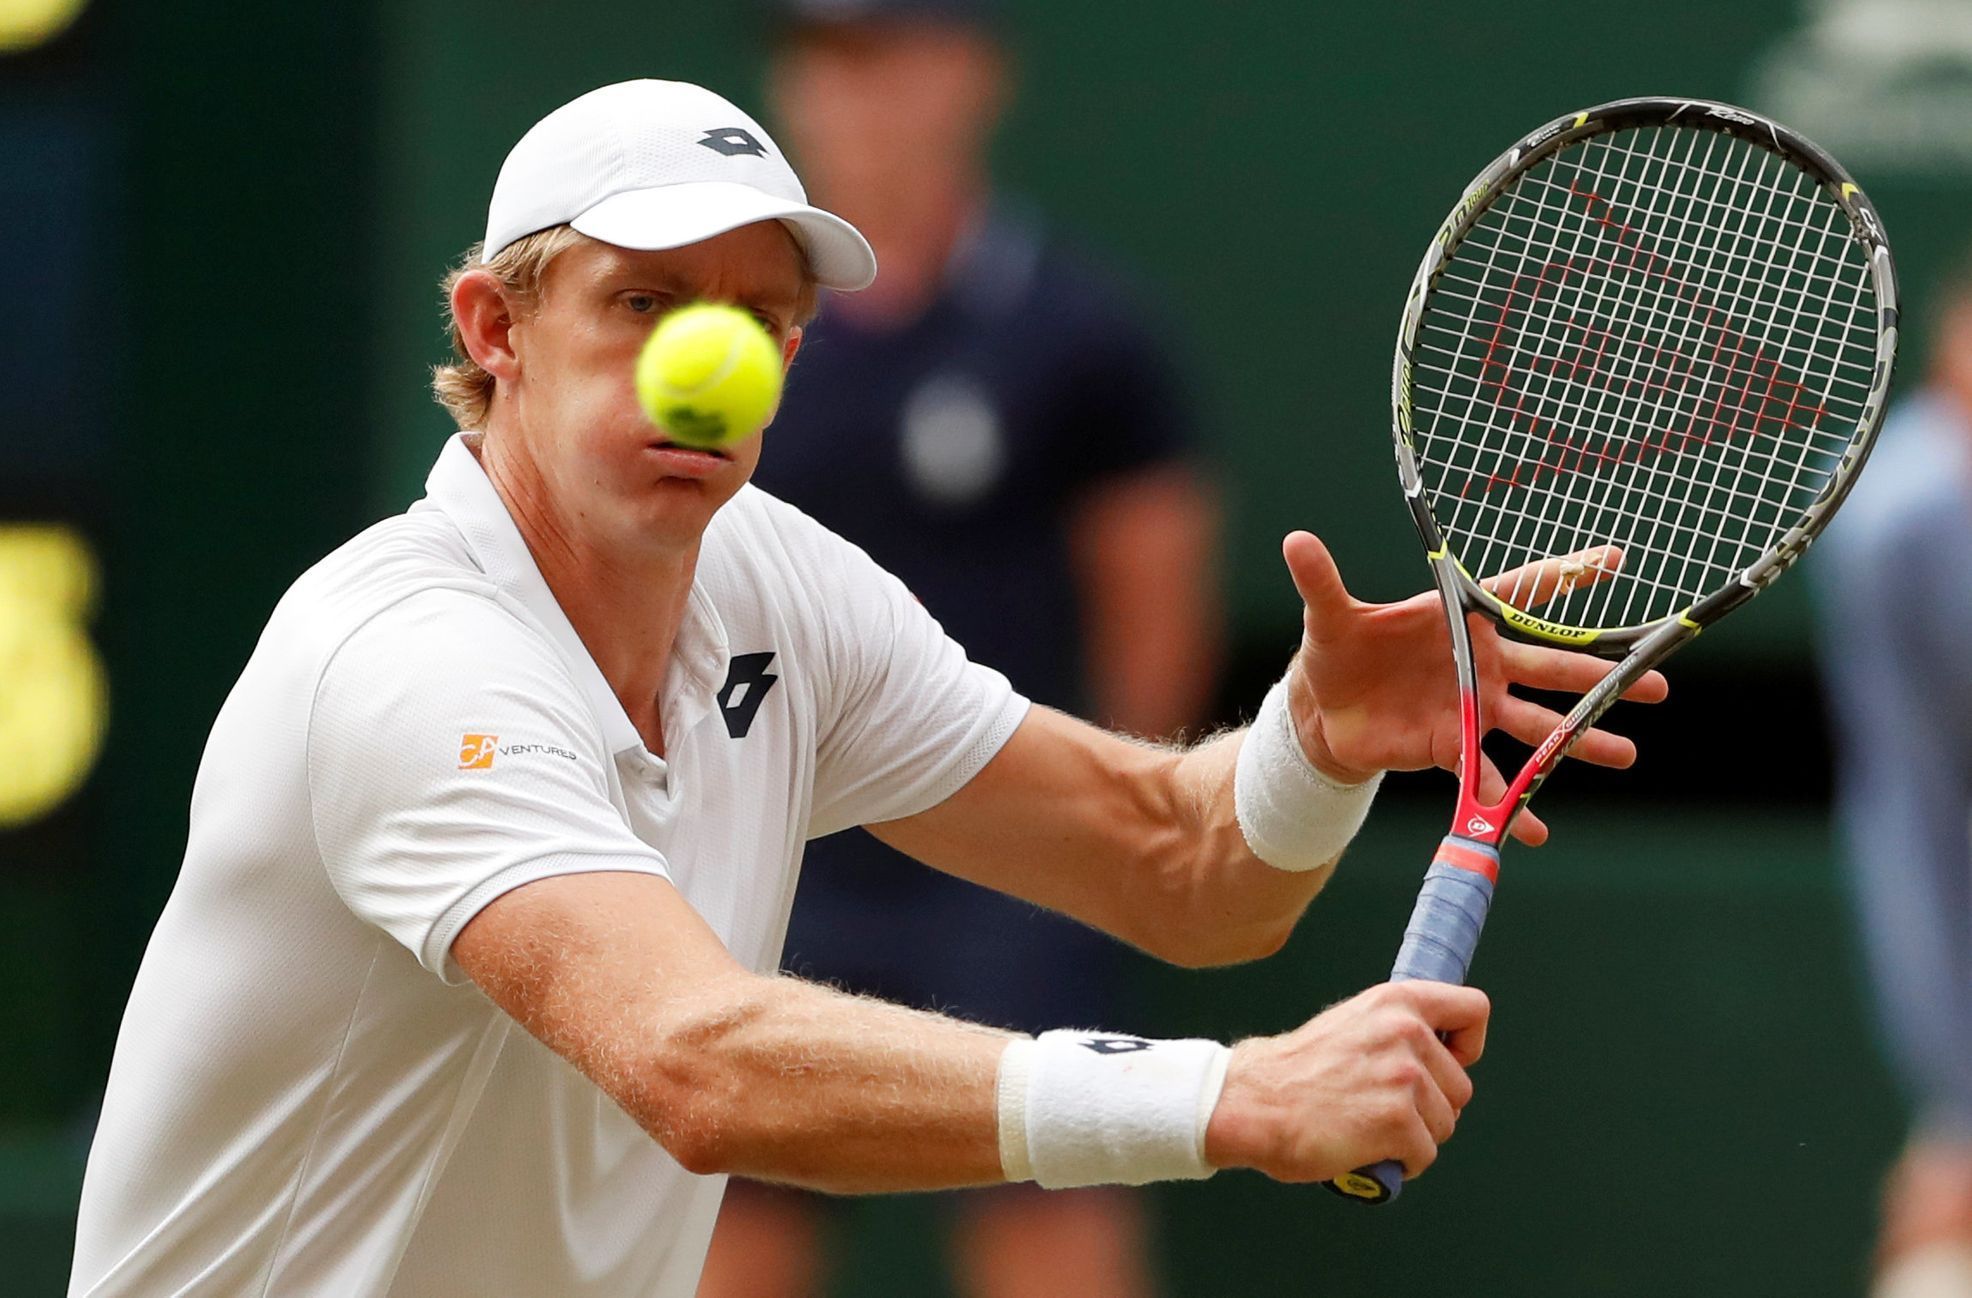 Wimbledon 2018 (Kevin Anderson)